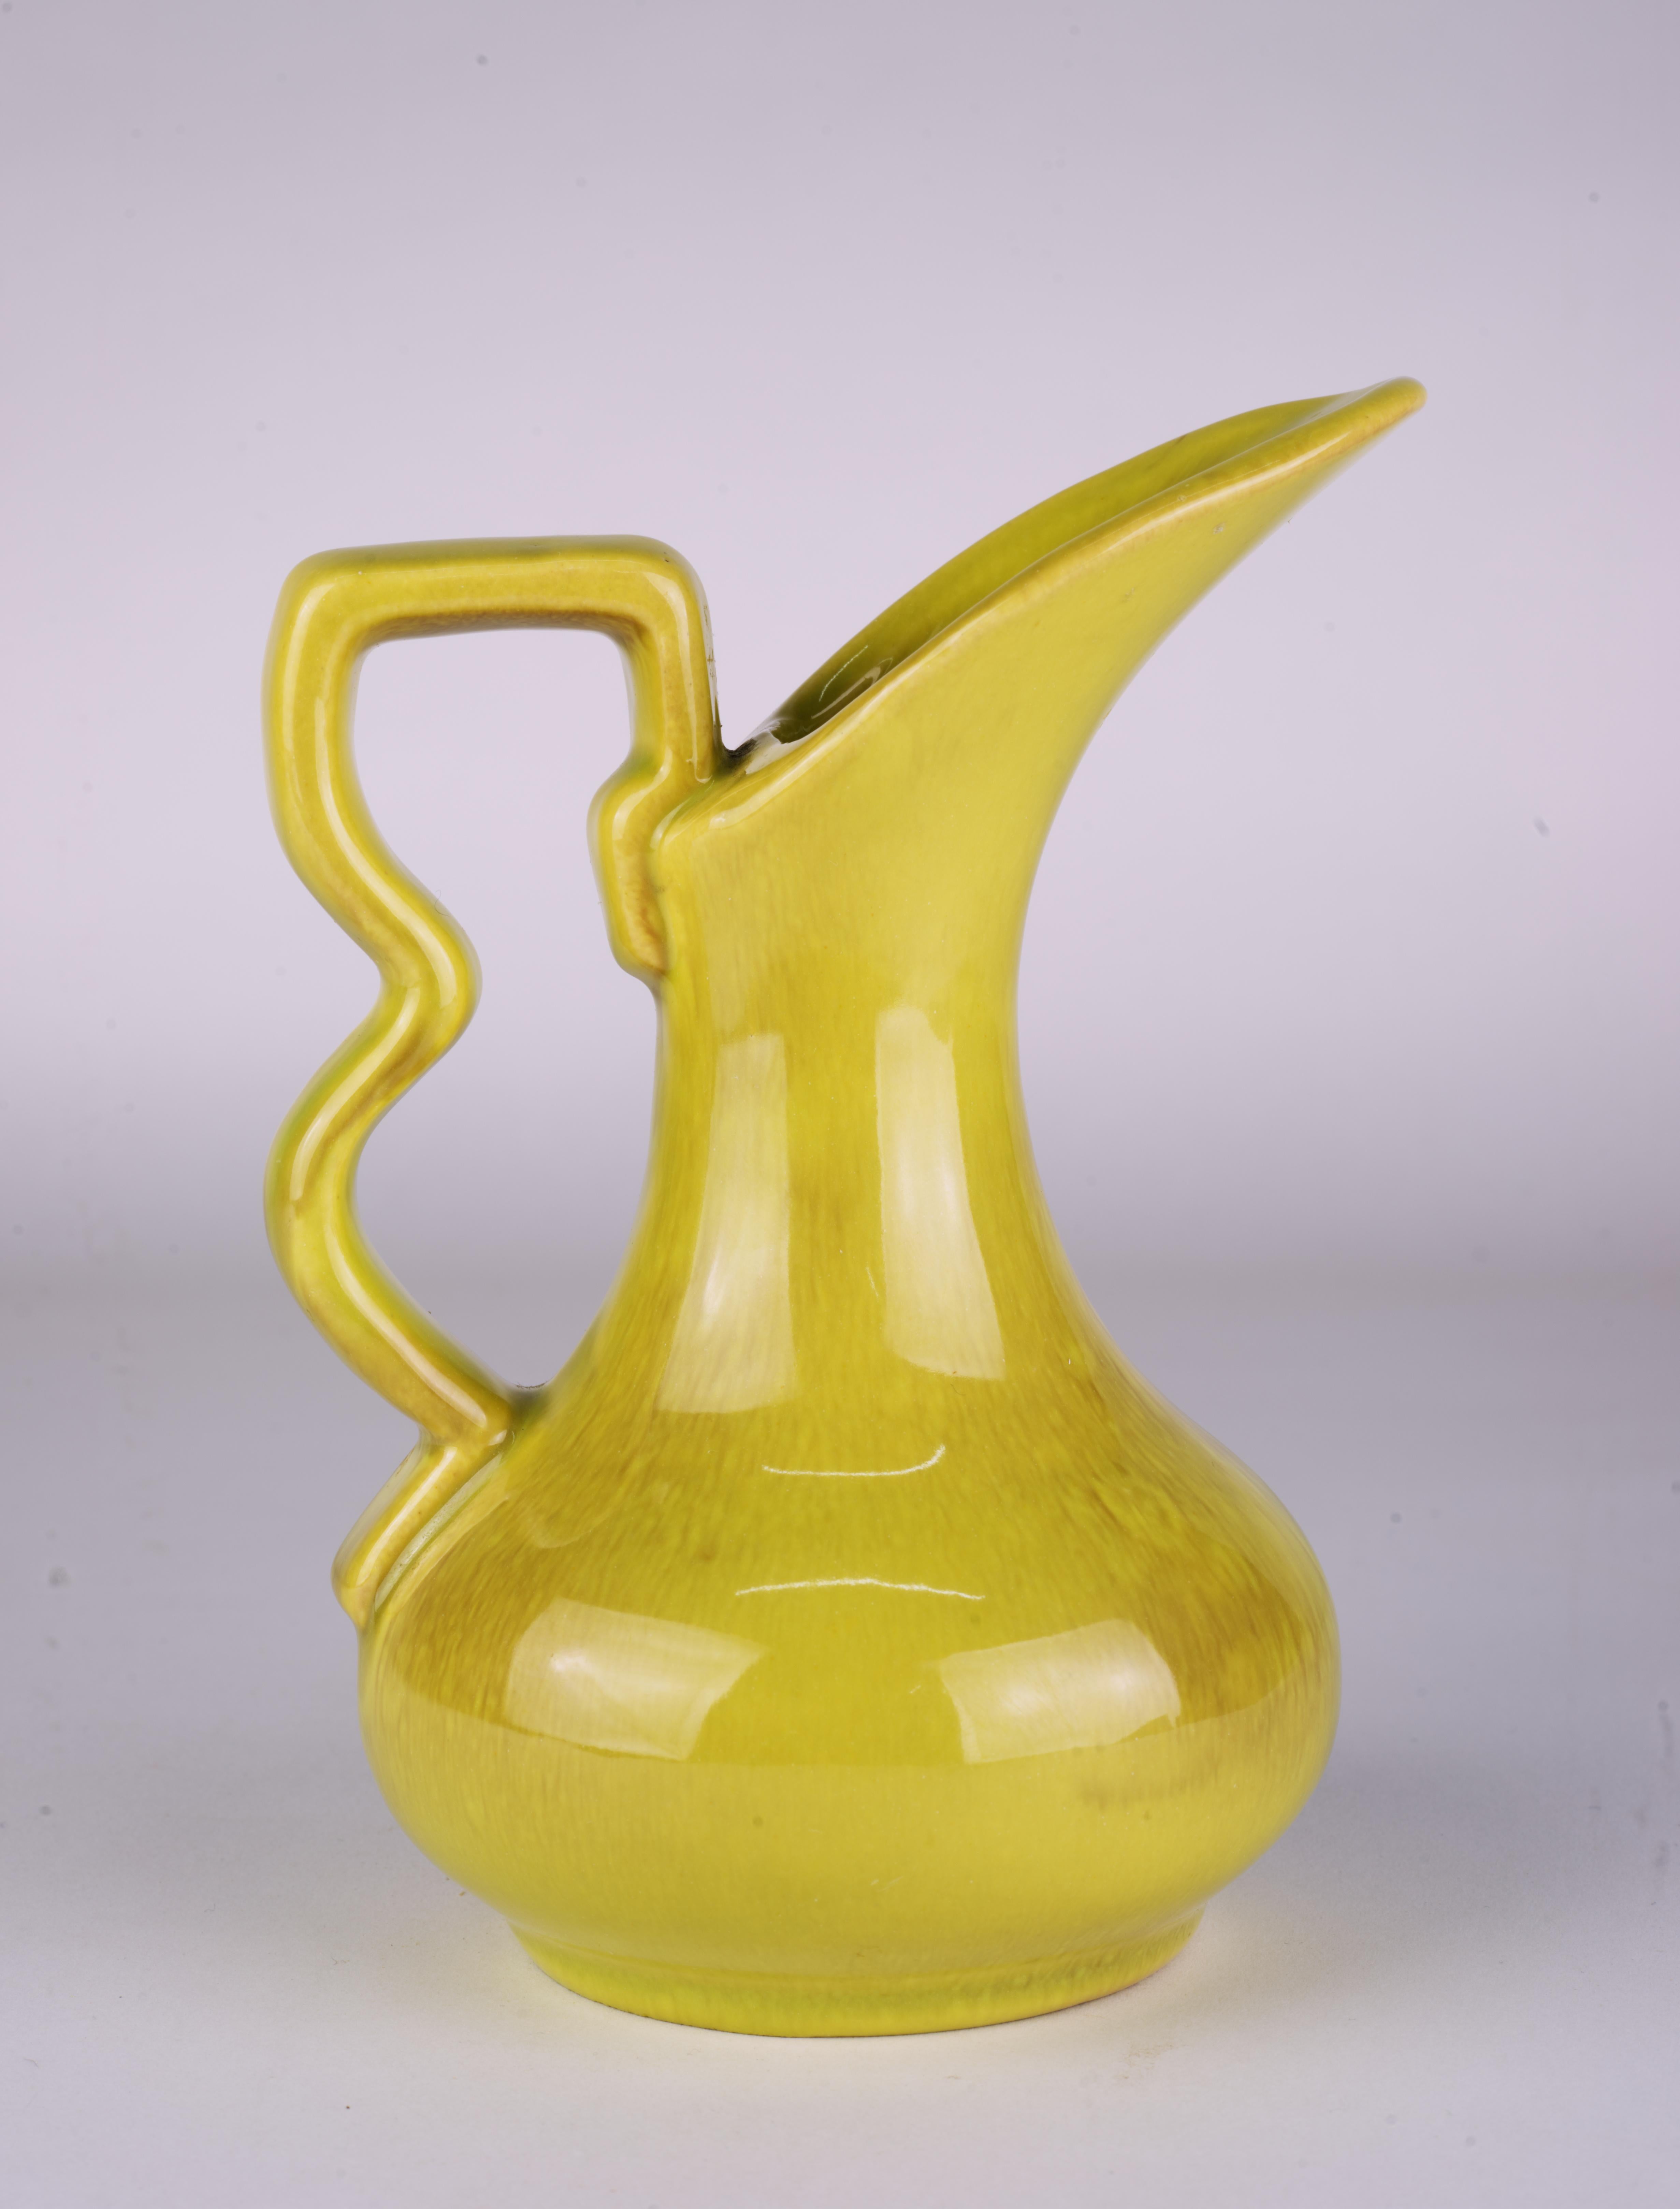  Vintage ceramic ewer-shaped bud vase was made by Gonder Pottery in Zanesville, Ohio. The vase has highly sculptural, characteristic mid-century modern shape with graphic handle that is accentuated by complex chartreuse glaze with light brown drip